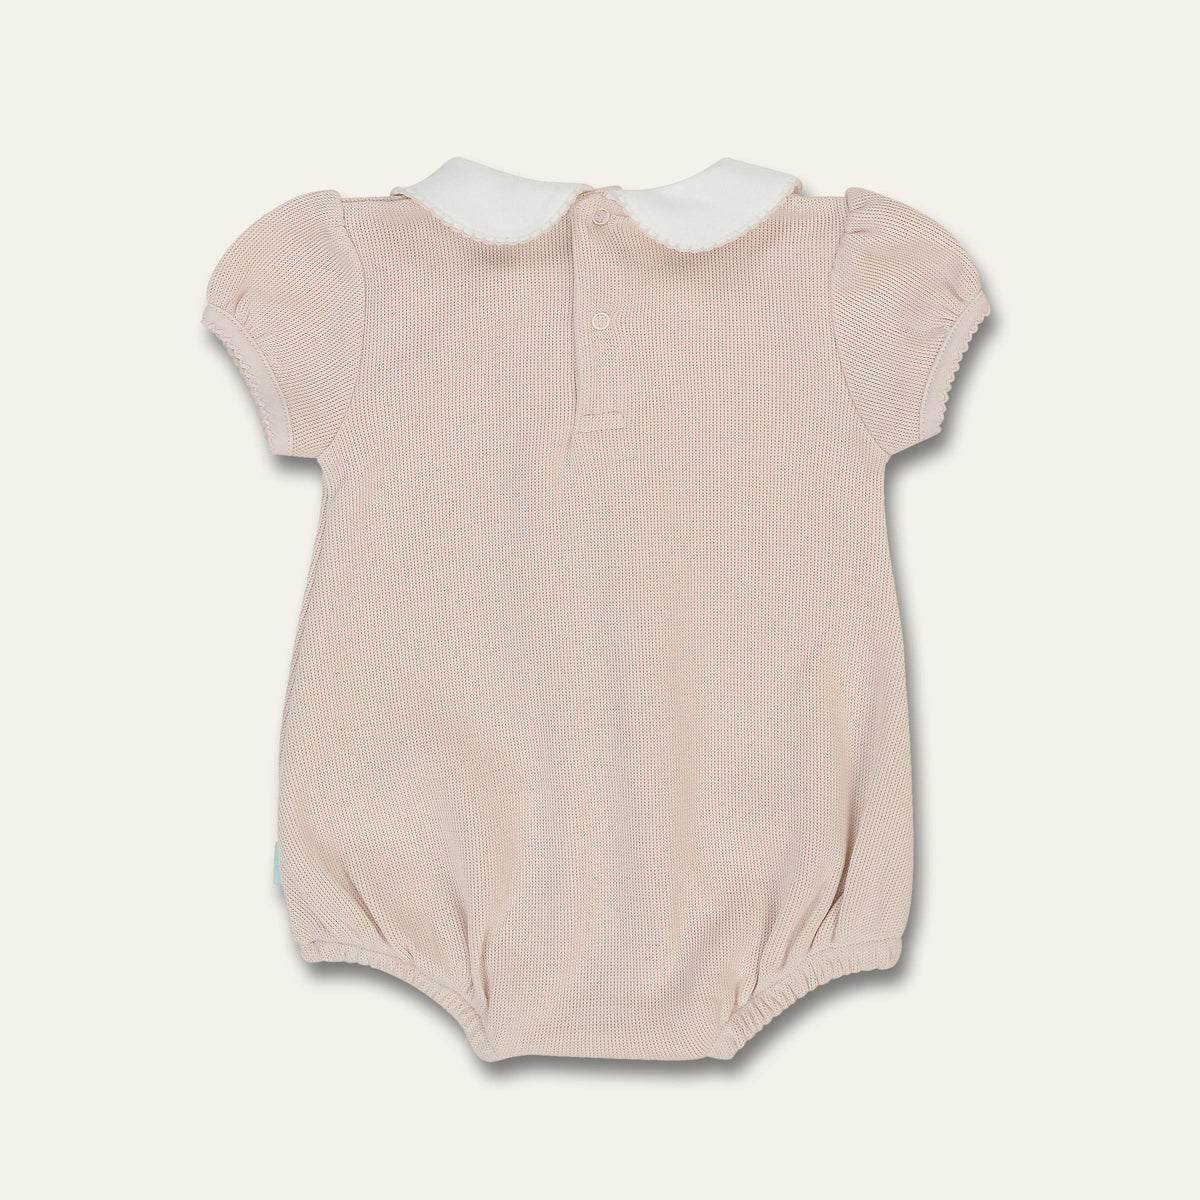 Girl's Bubble Romper with Peter Pan Collar